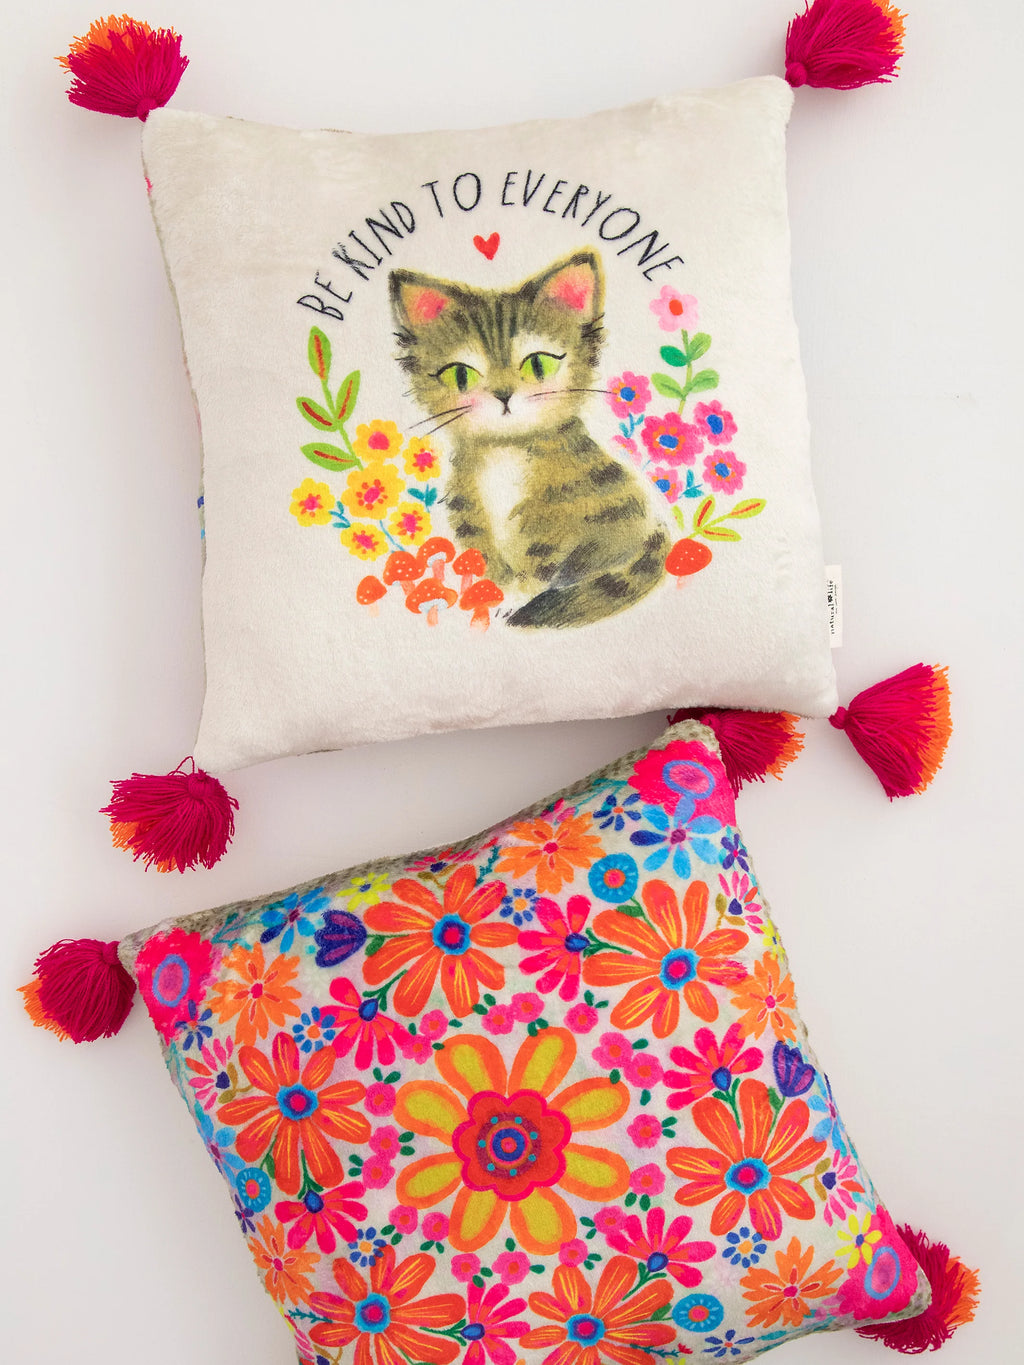 Natural Life® Cozy Throw Pillow - Be Kind To Everyone